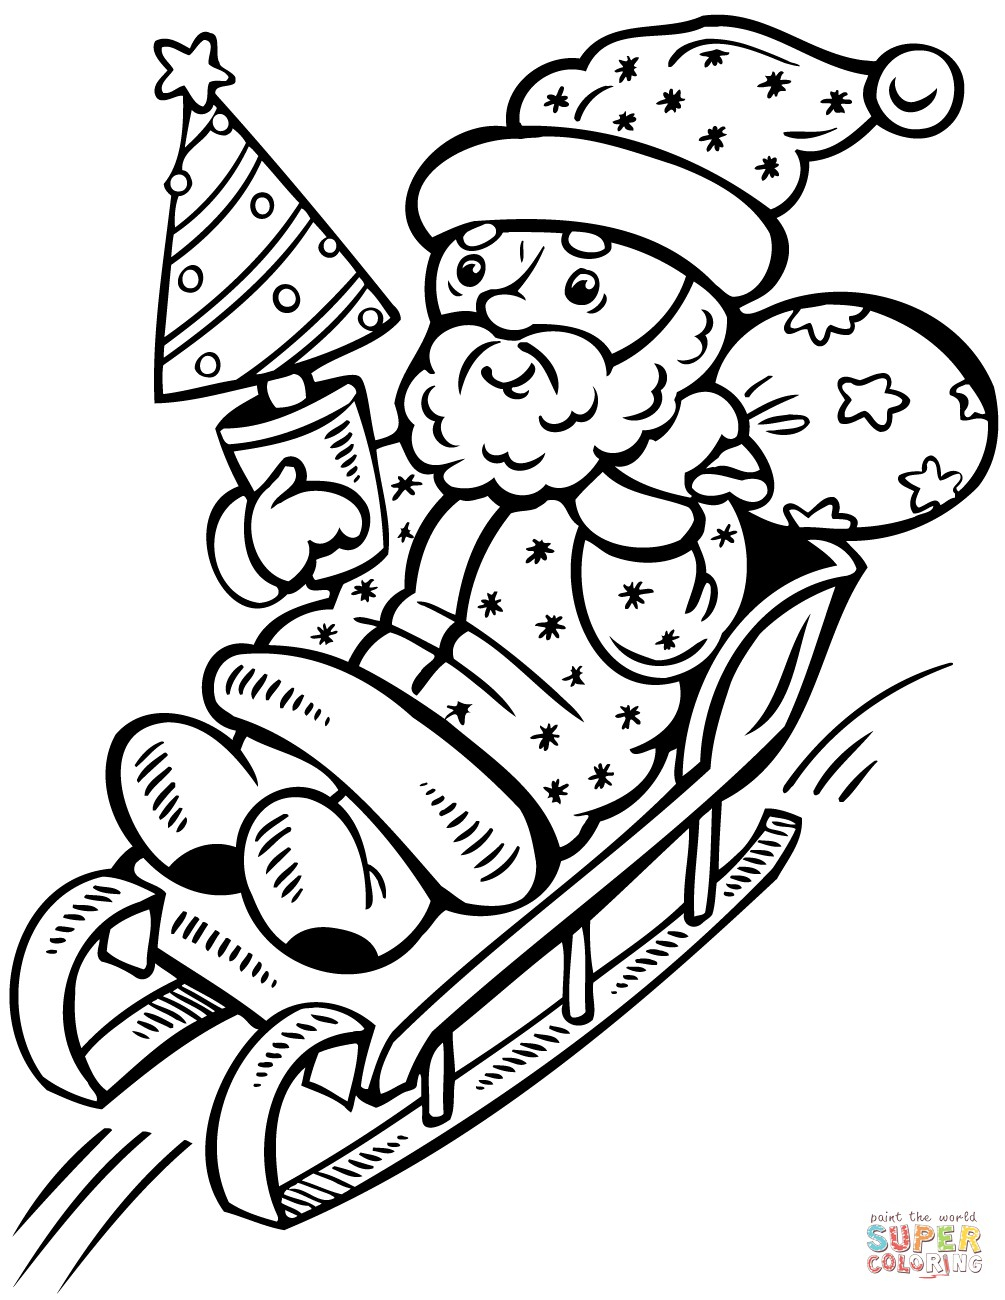 Santa Claus In Sleigh Coloring Page Santa Claus On Sleigh With Christmas Tree Coloring Page Free Awesome